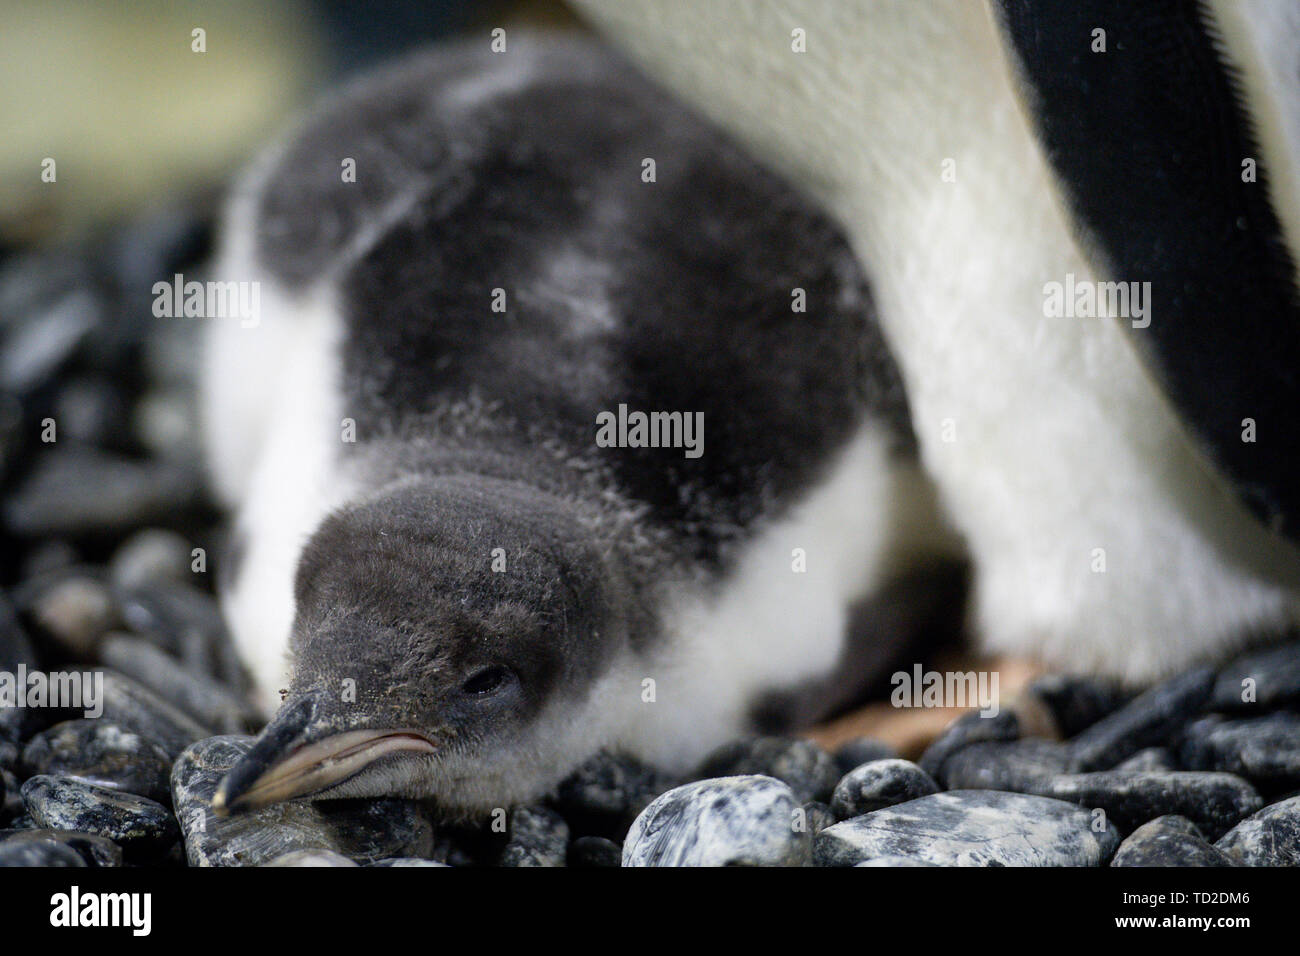 A rare baby gentoo penguin which was born at the National Sea Life Centre in Birmingham. The chick, whose parents traveled thousands of miles by airplane to conceive as part of Sea Life's breeding programme, has been named 'Flash' after it hatched so quickly. Stock Photo